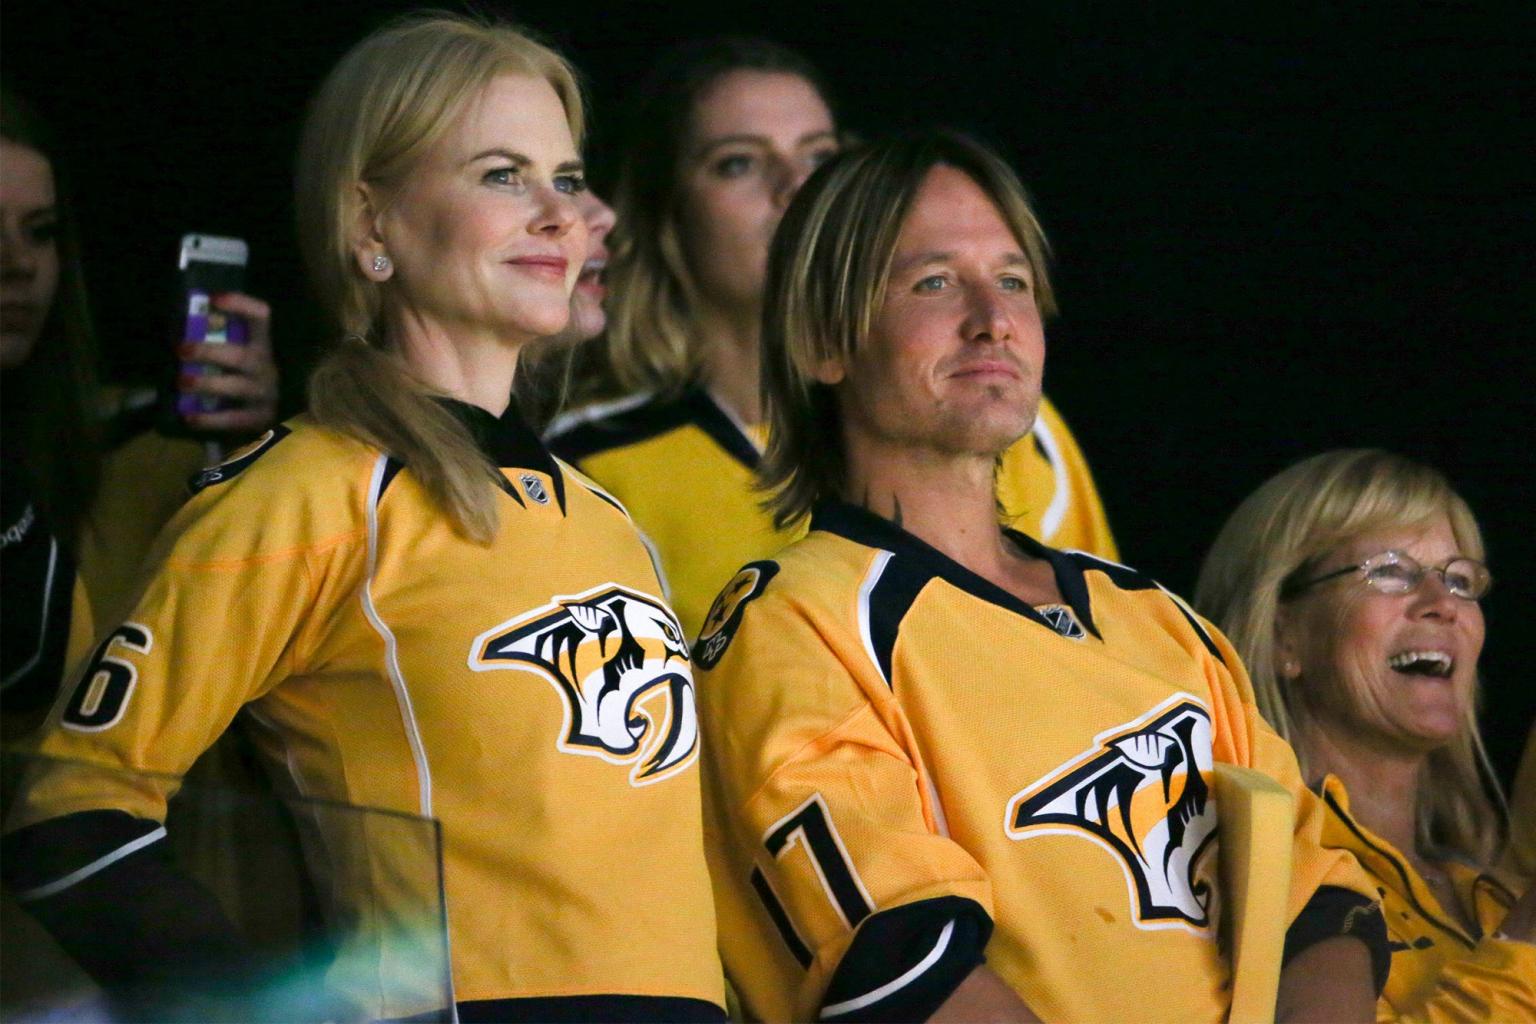 Nicole Kidman and Keith Urban Adorably Celebrate a Nashville Predators Goal at Stanley Cup Game